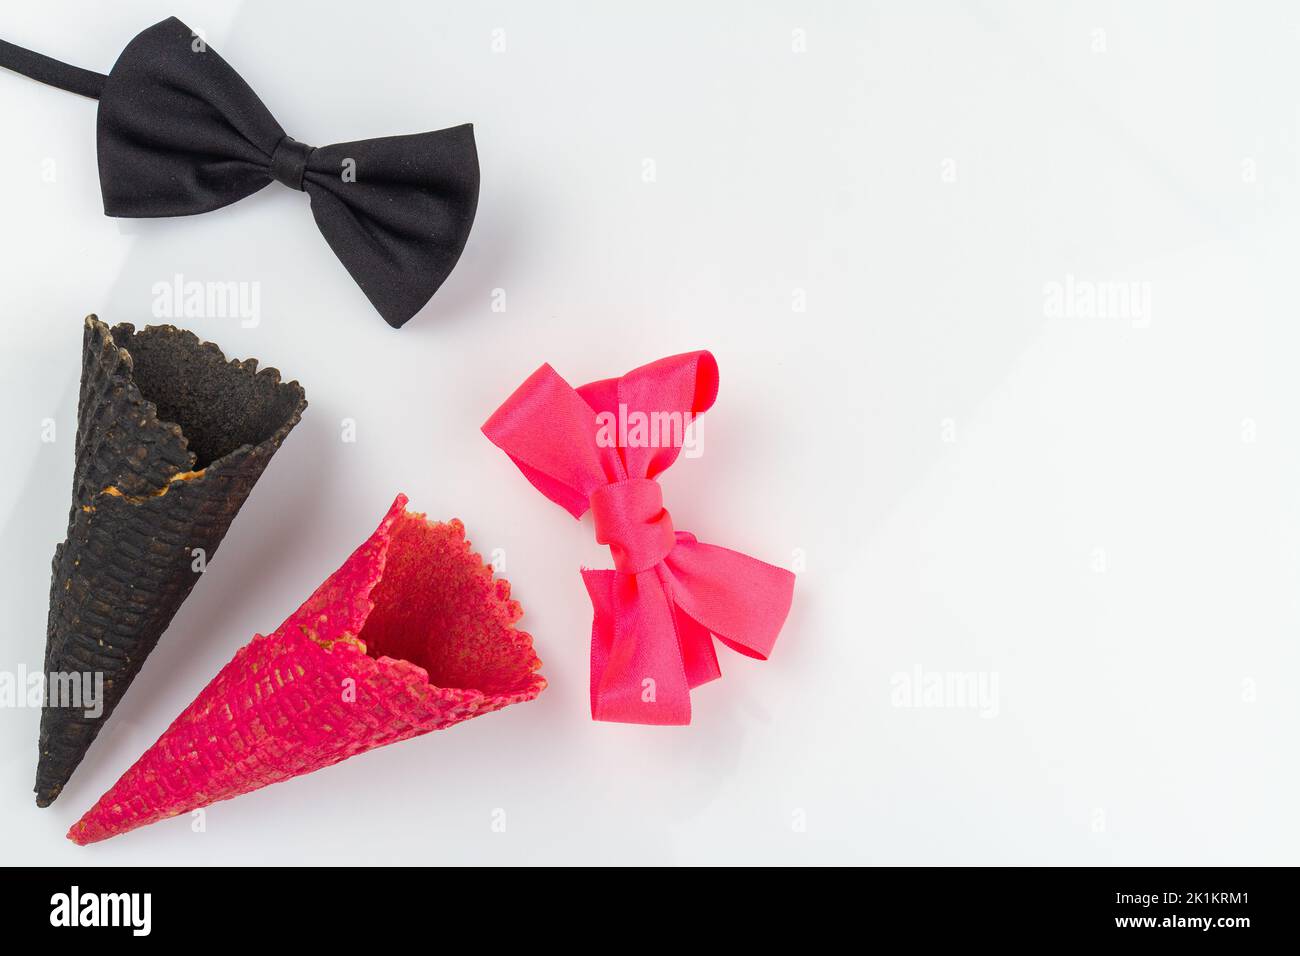 Top view male and female ice cream cones with copy space. Black and pink bow ties. Stock Photo